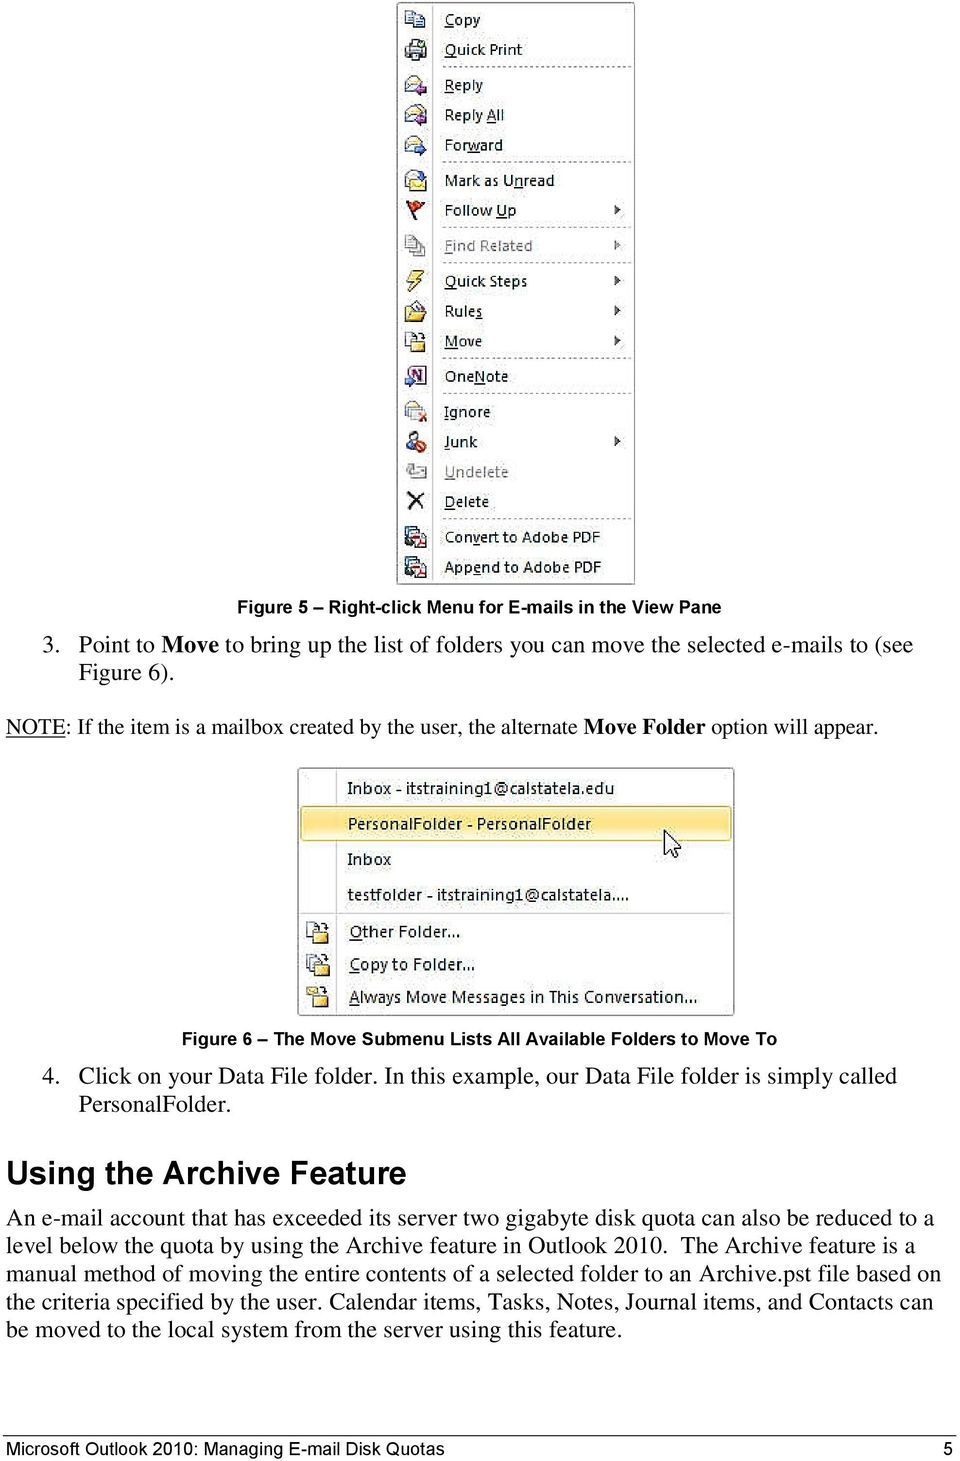 In this example, our Data File folder is simply called PersonalFolder.